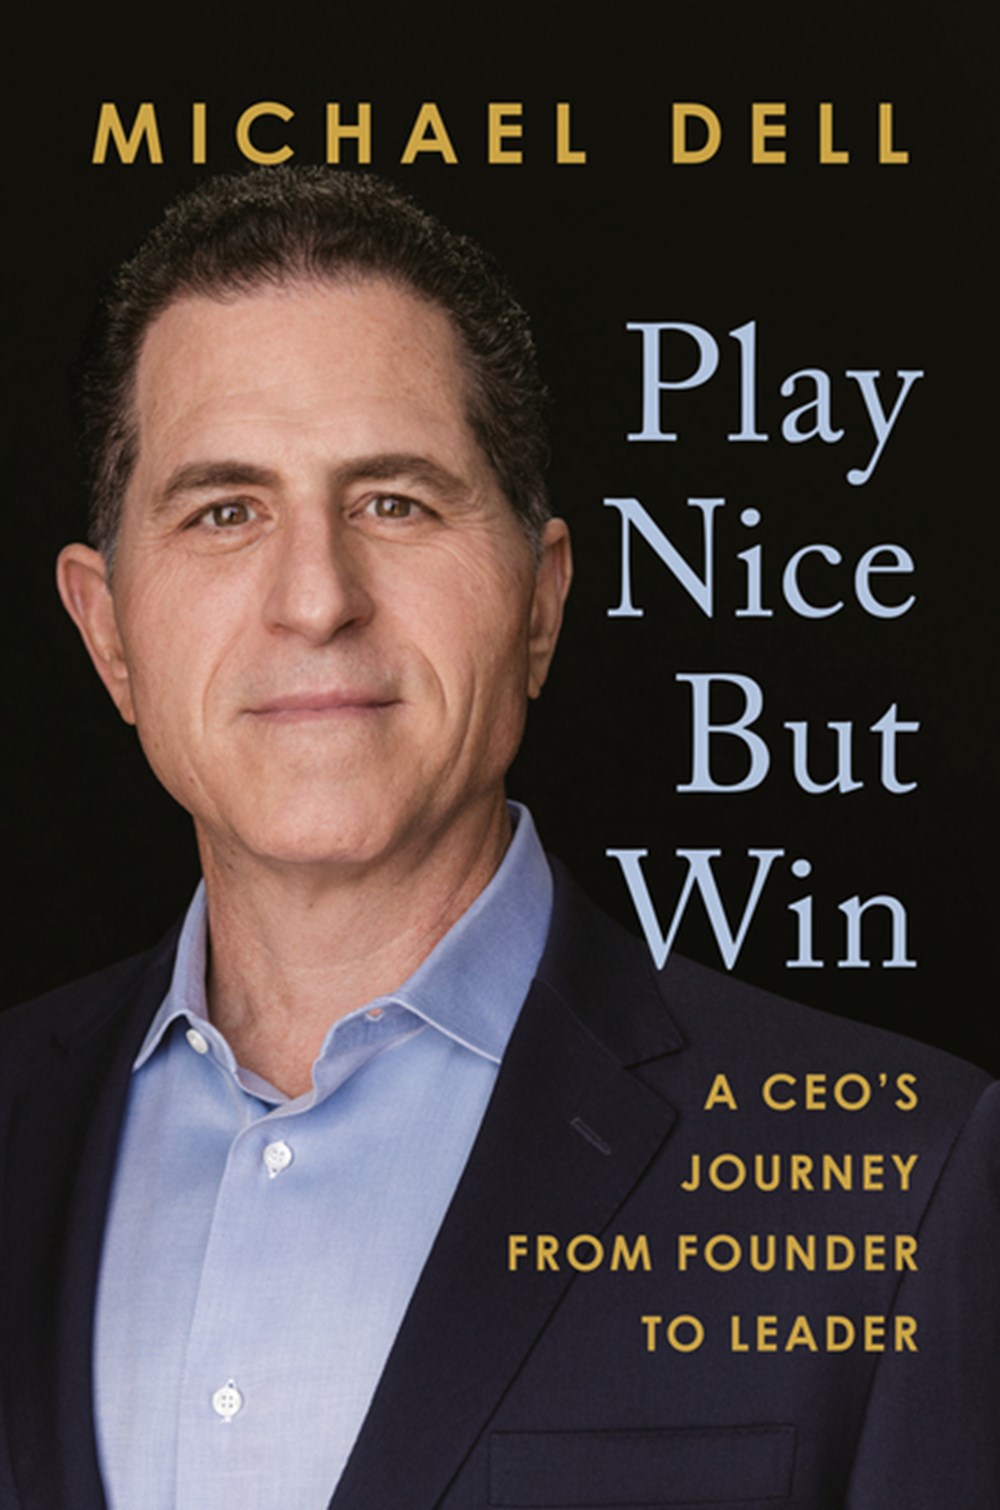 Play Nice But Win A Ceo's Journey from Founder to Leader